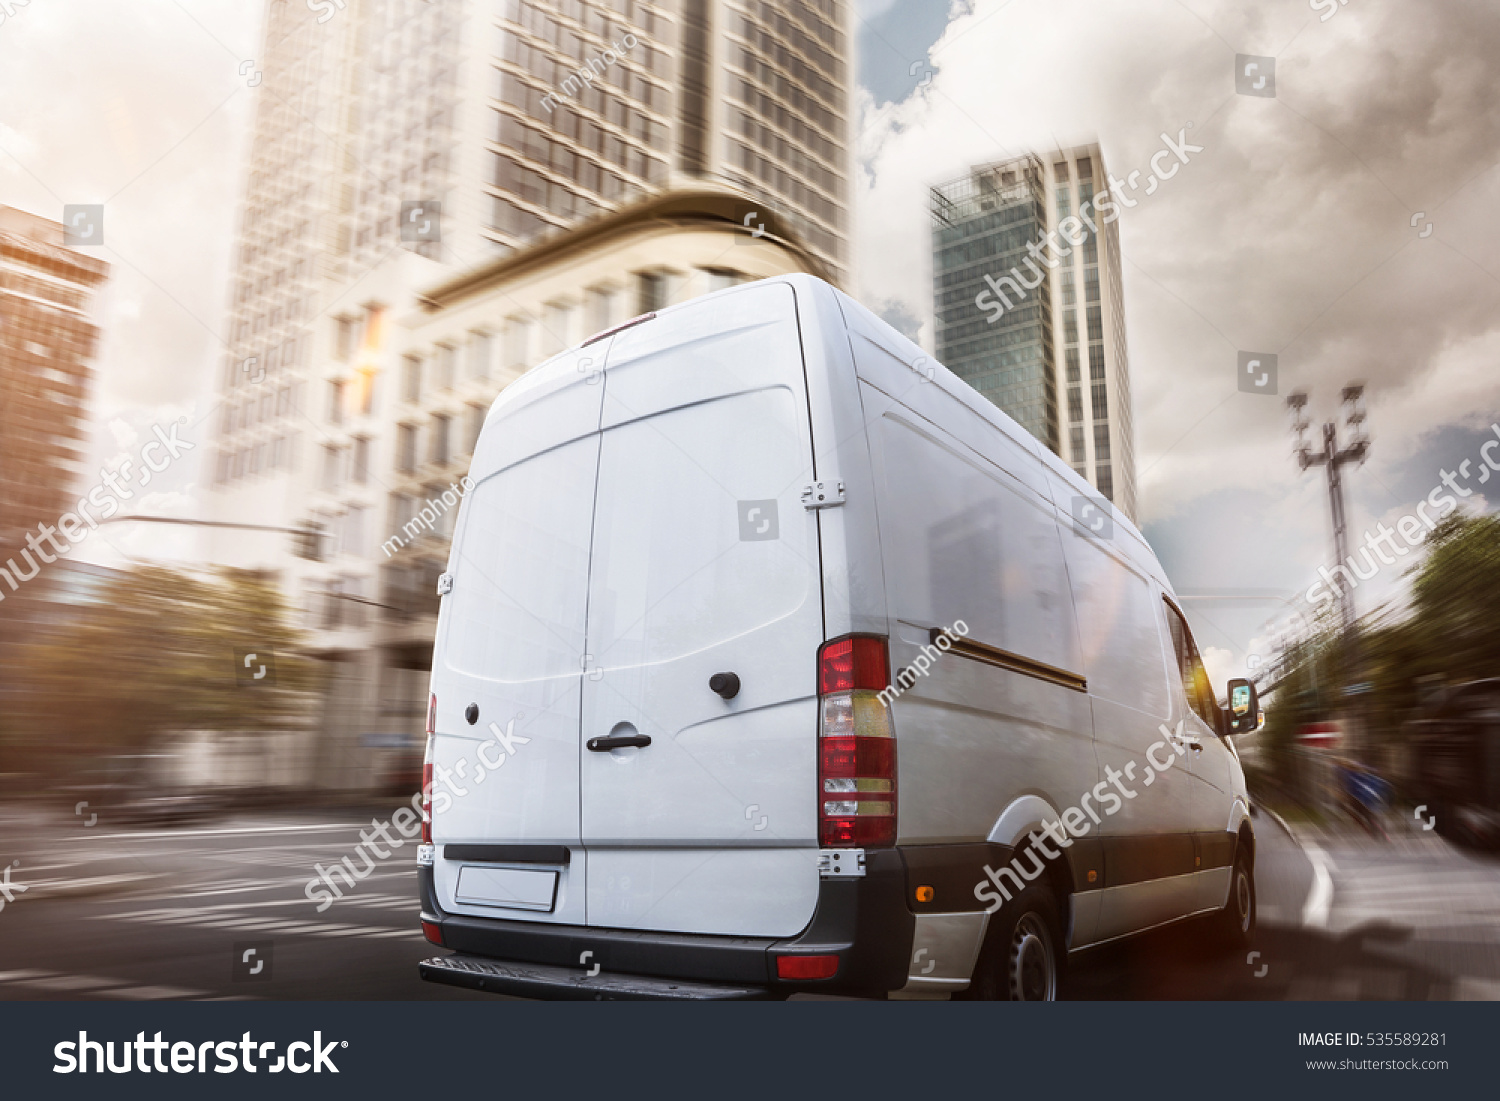 stock-photo-delivery-truck-in-a-city-535589281.jpg